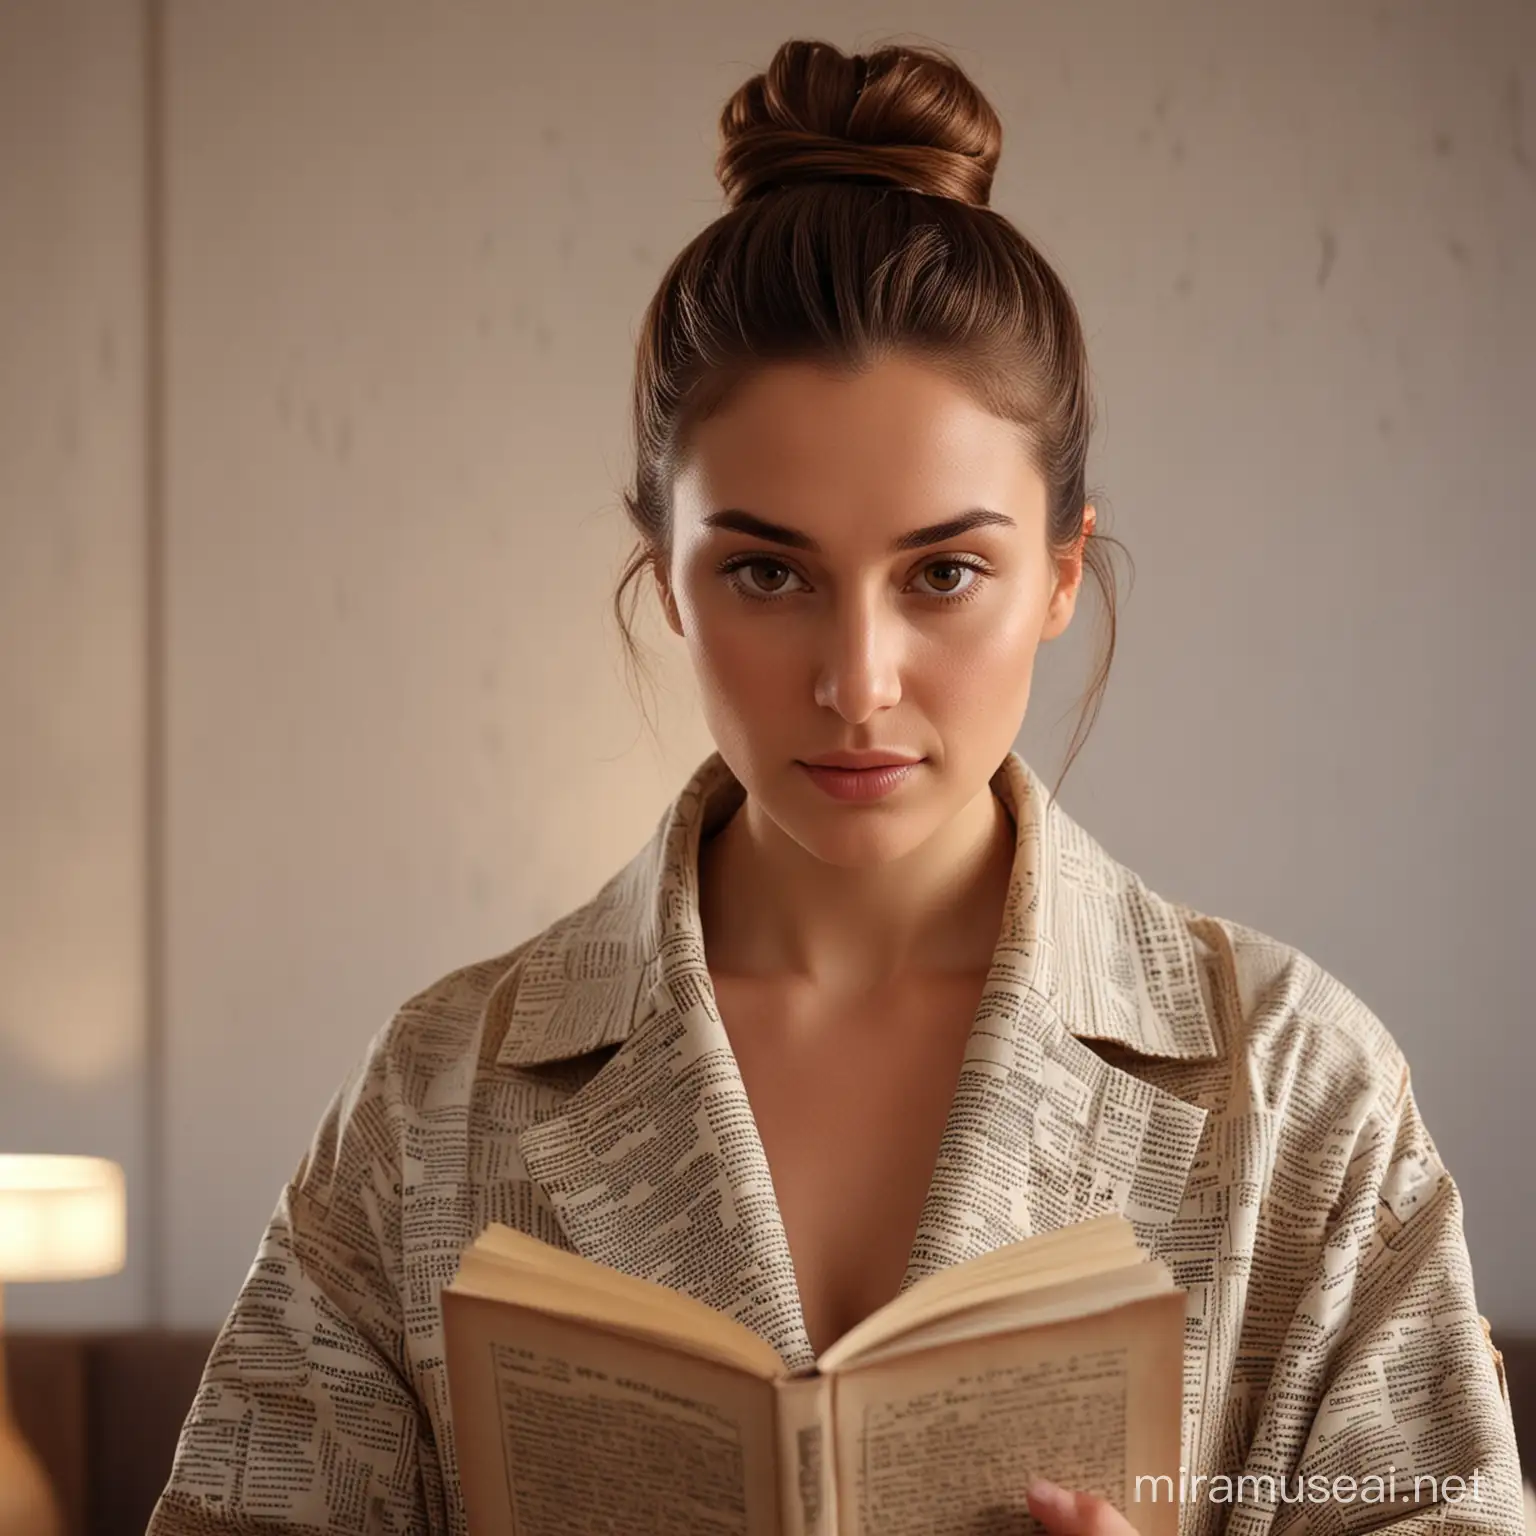 Photo, a white woman, 25 years old, brown hair in a bun, brown eyes, peaceful face, wearing a coat made out of book pages,  ambient lighting, front view, indoors, daylight, long shot, UHD, highly detailed.